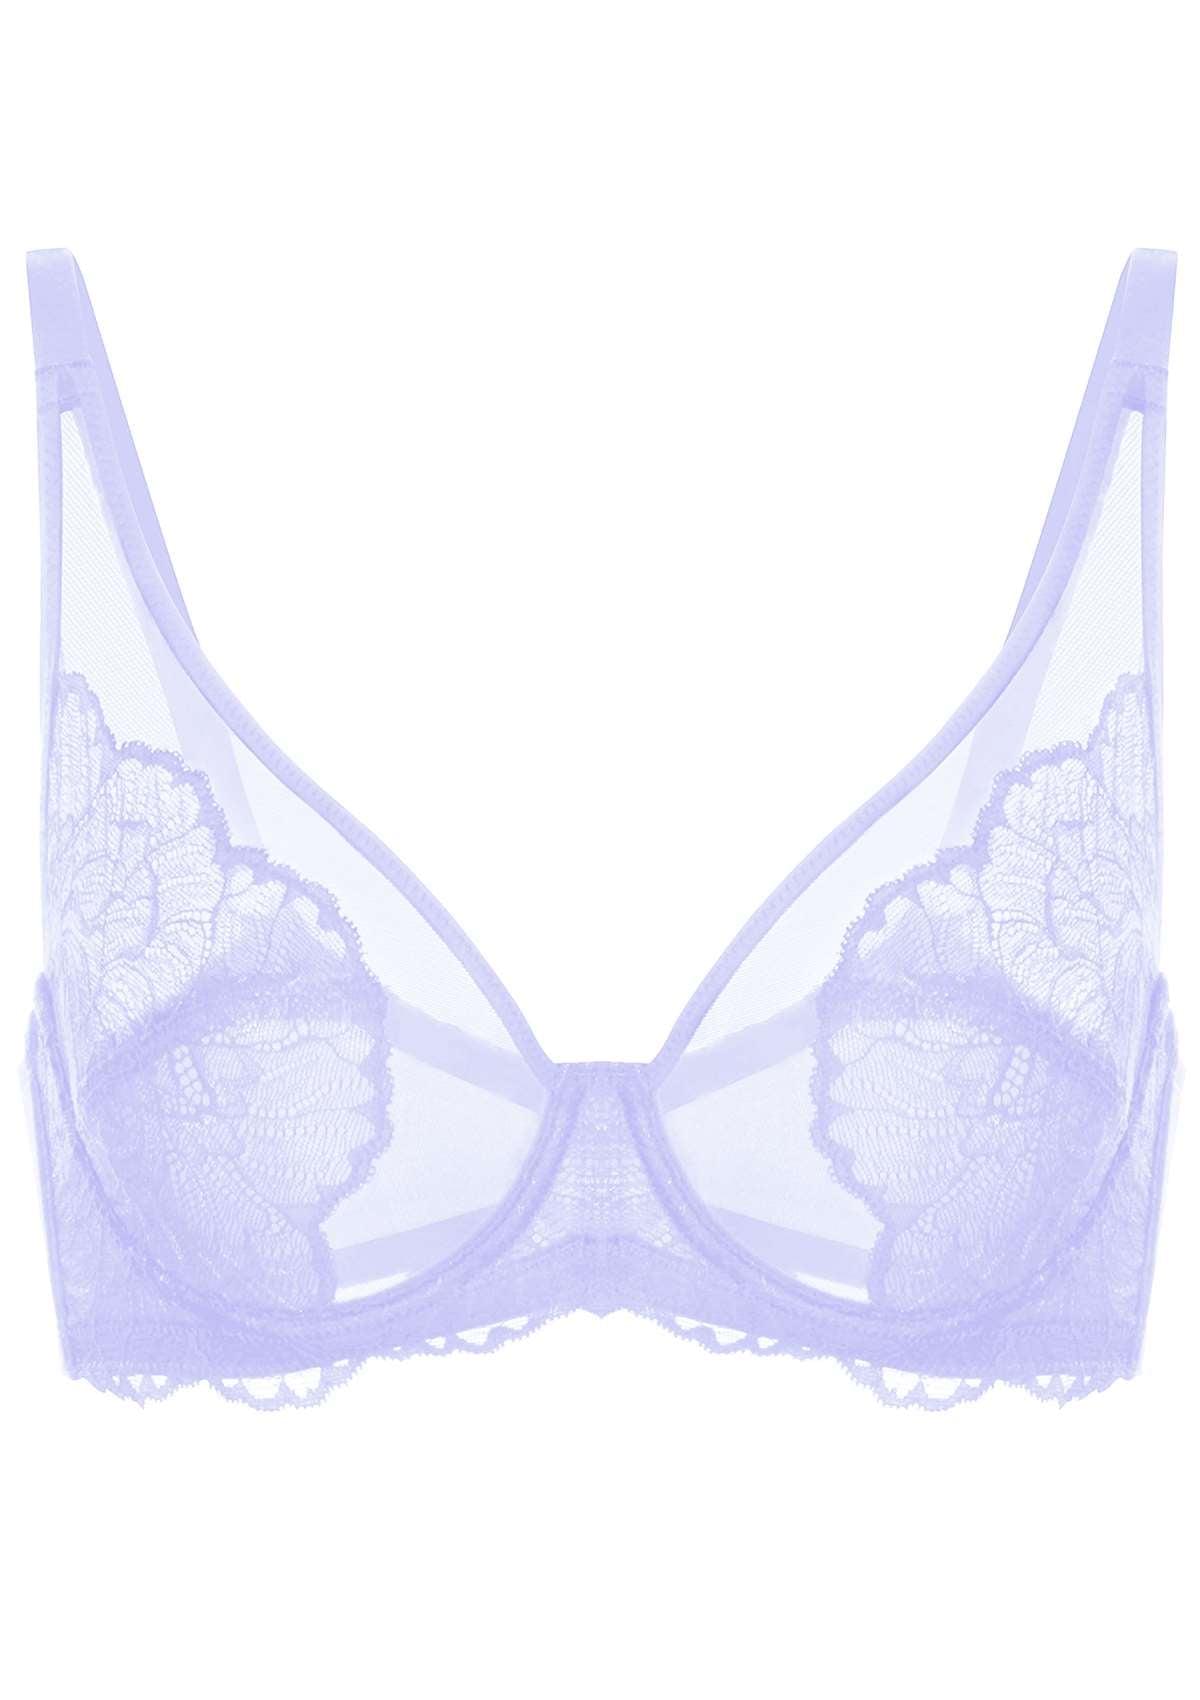 HSIA Blossom Transparent Lace Bra: Plus Size Wired Back Smoothing Bra - Light Purple / 38 / DD/E